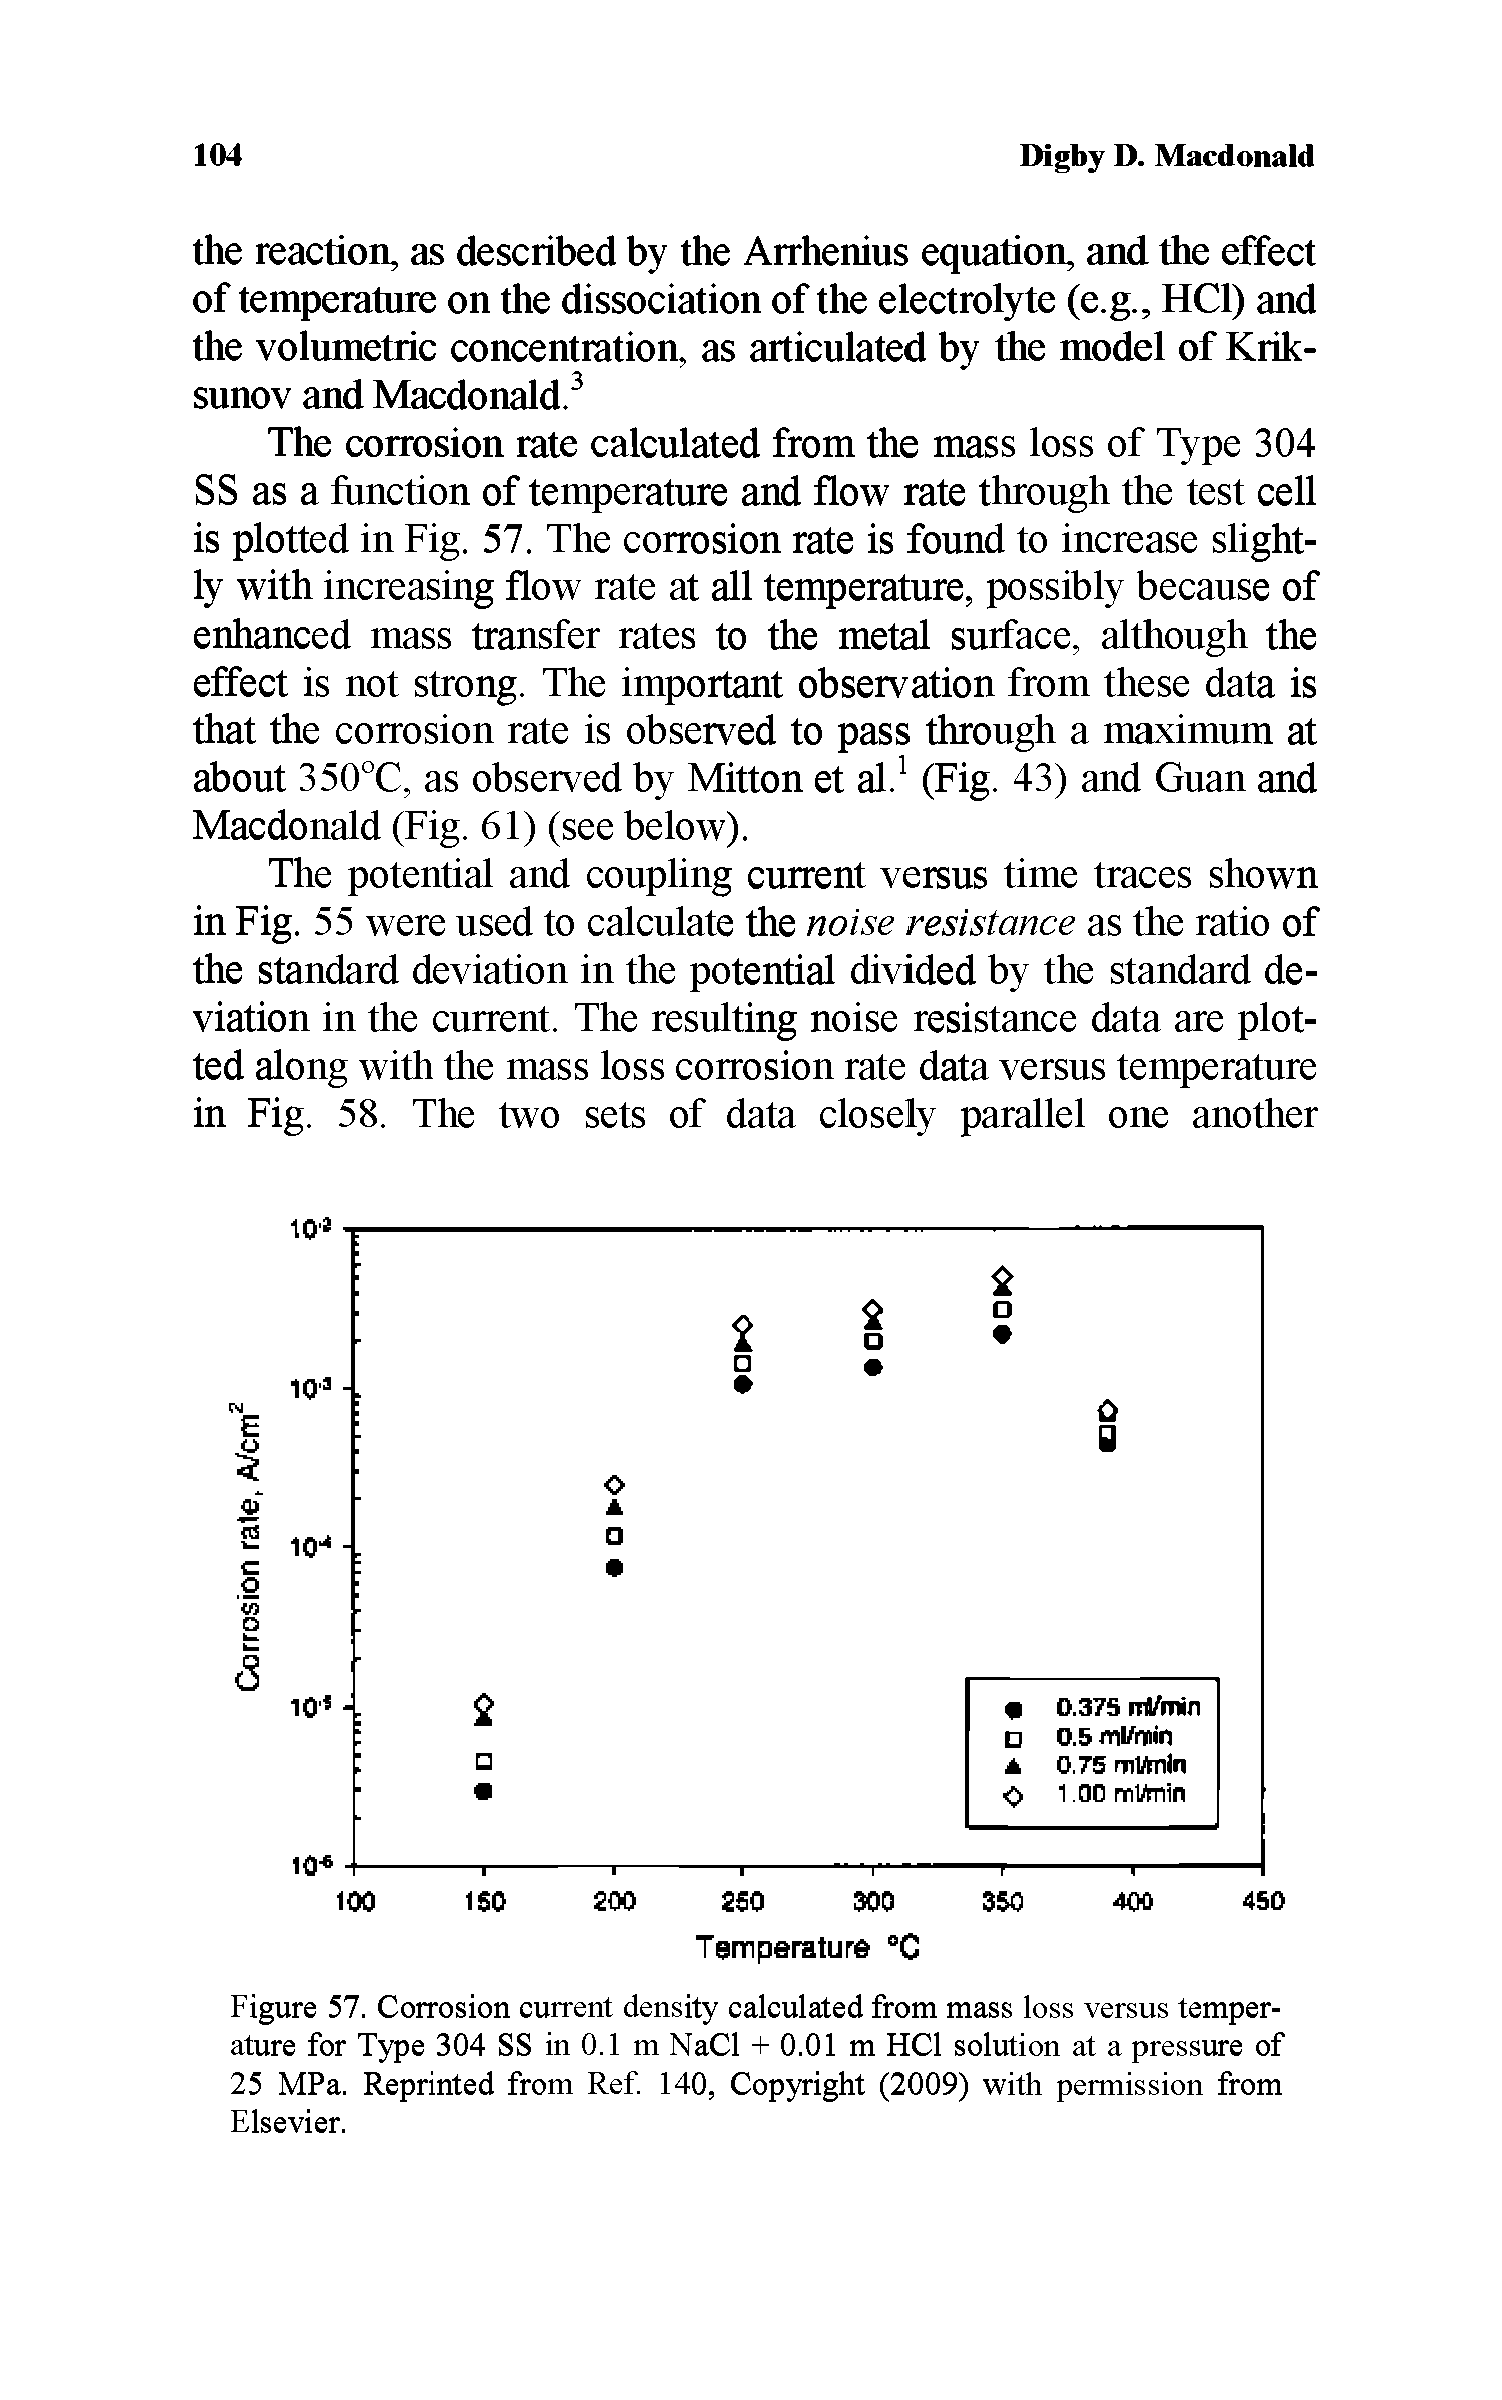 Figure 57. Corrosion current density calculated from mass loss versus temperature for Type 304 SS in 0.1 m NaCl + 0.01 m HCl solution at a pressure of 25 MPa. Reprinted from Ref 140, Copyright (2009) with permission from Elsevier.